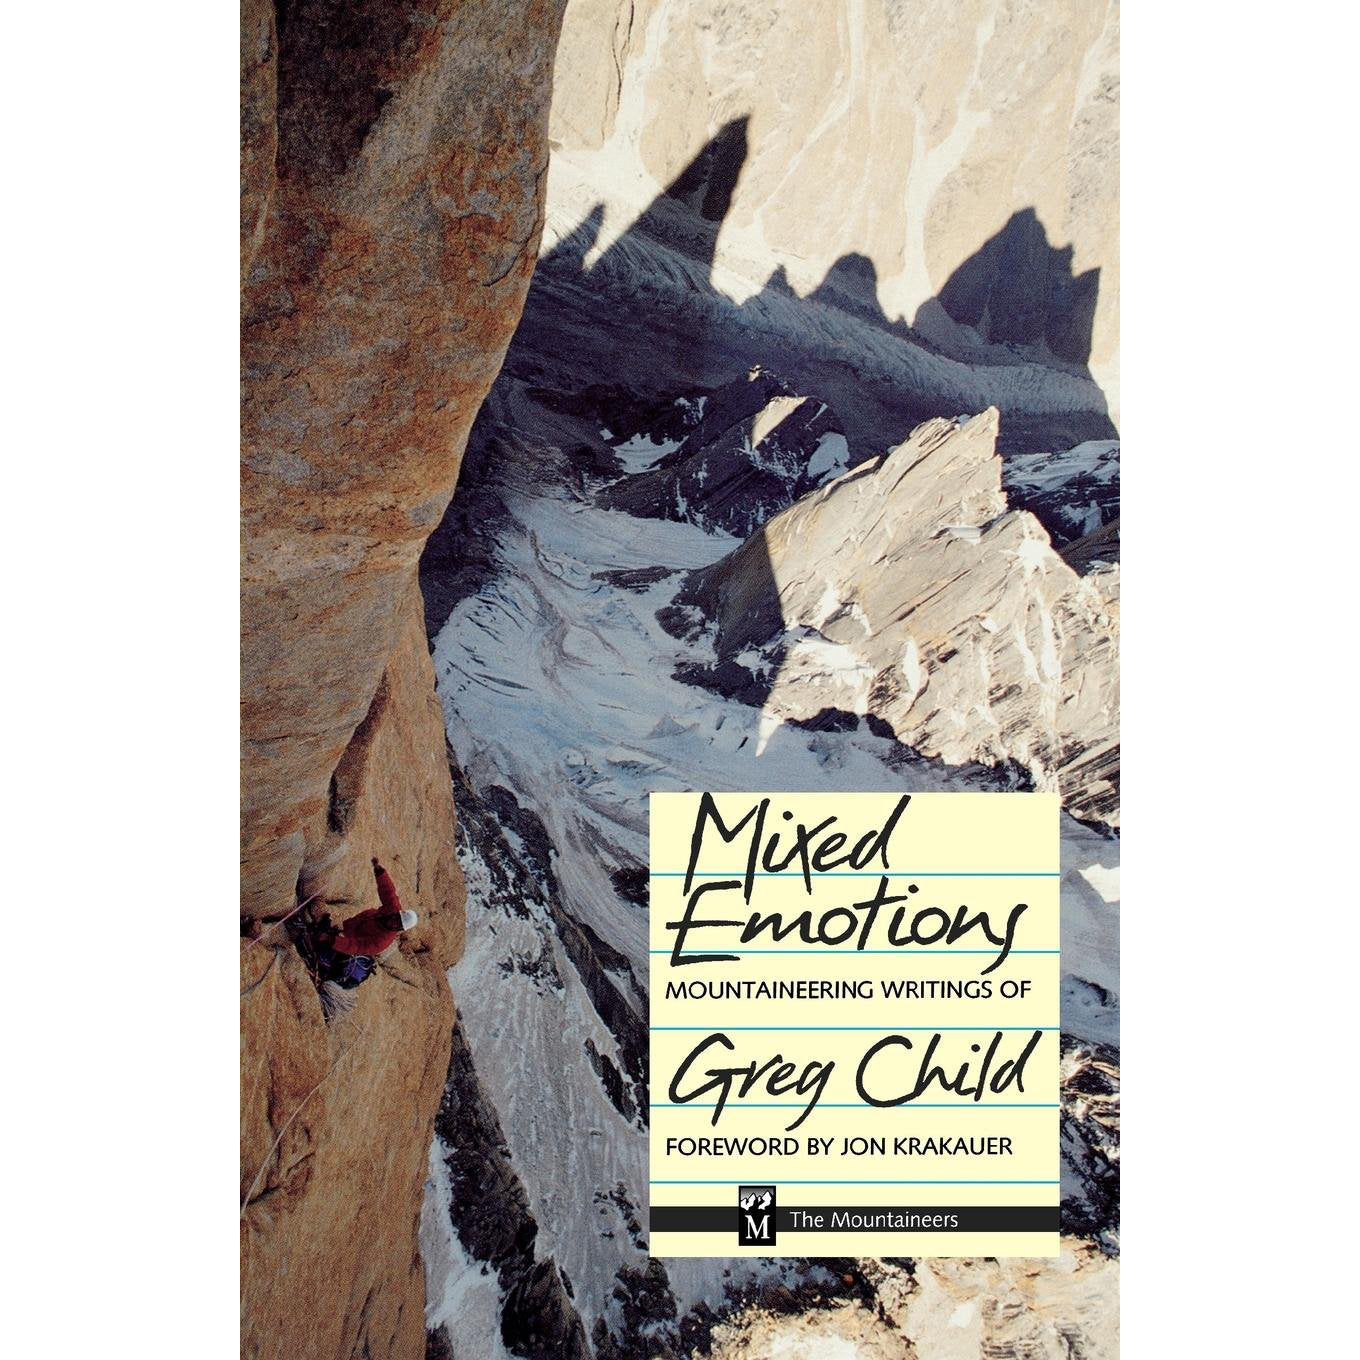 mixed emotions: mountaineering writings of greg childs